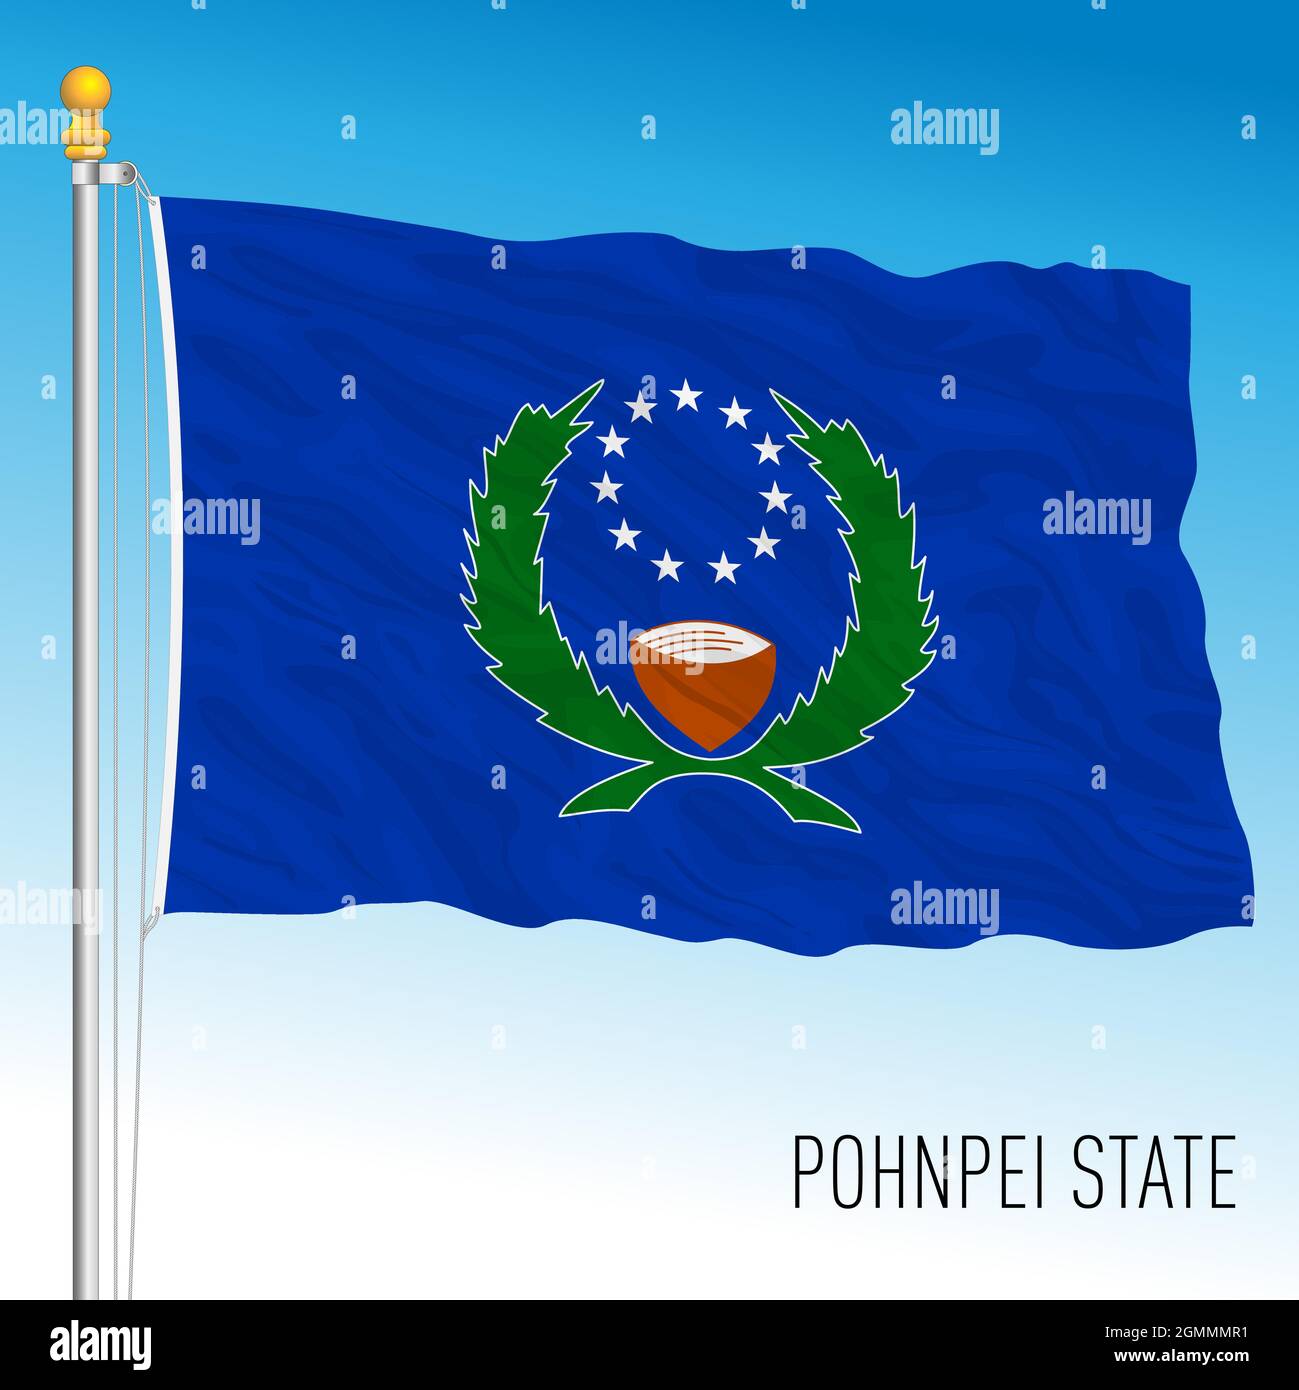 Pohnpei State official national flag, Micronesia Federation, Oceania, vector illustration Stock Vector